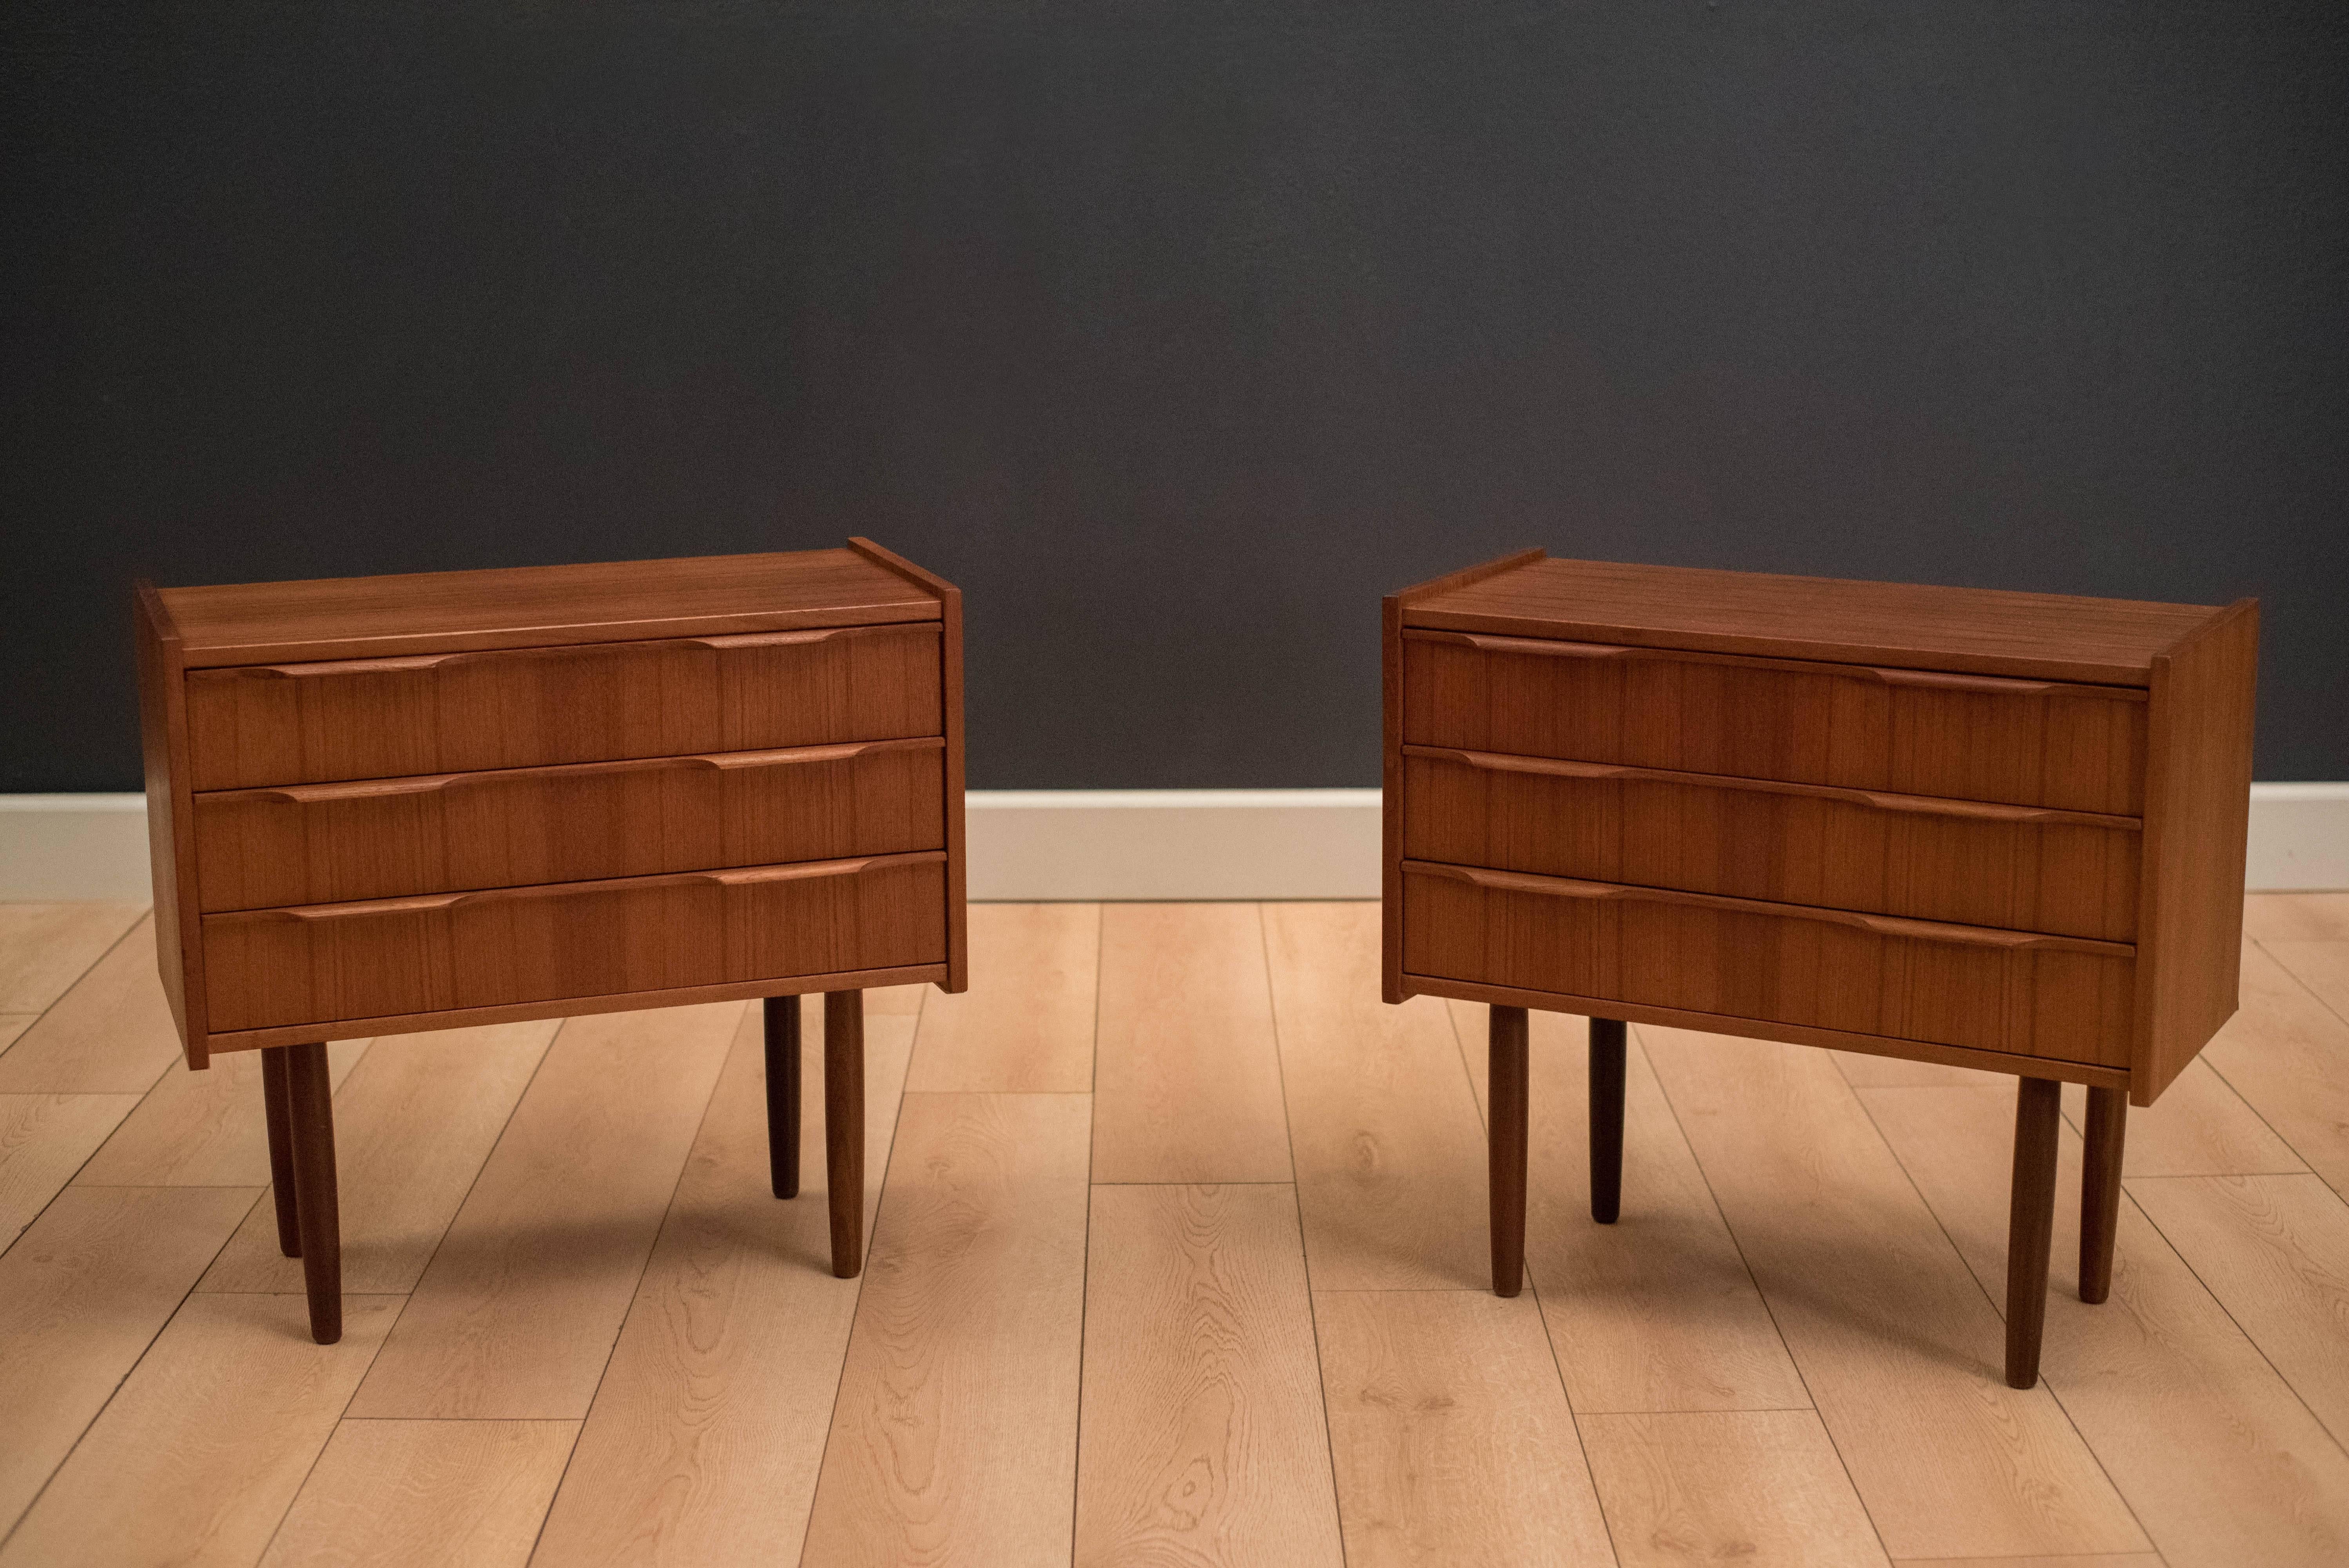 Midcentury teak nightstands manufactured by Ejsing Mobelfabrik, Denmark. This matching set includes three dovetailed drawers with sculpted handles. Price is for the pair. 

  